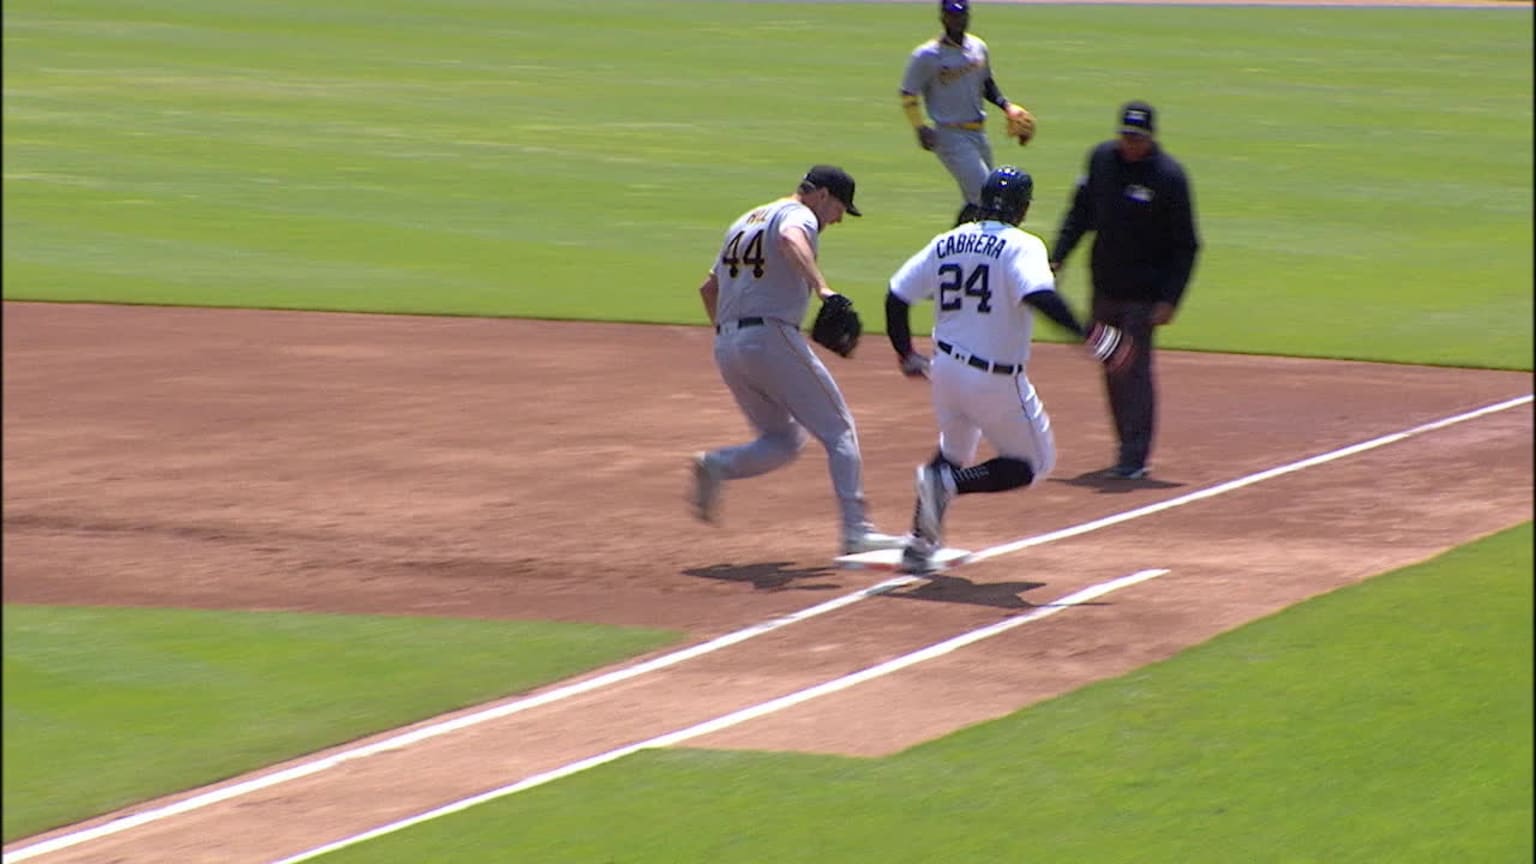 Rich Hill and Miguel Cabrera touch first base in a close play